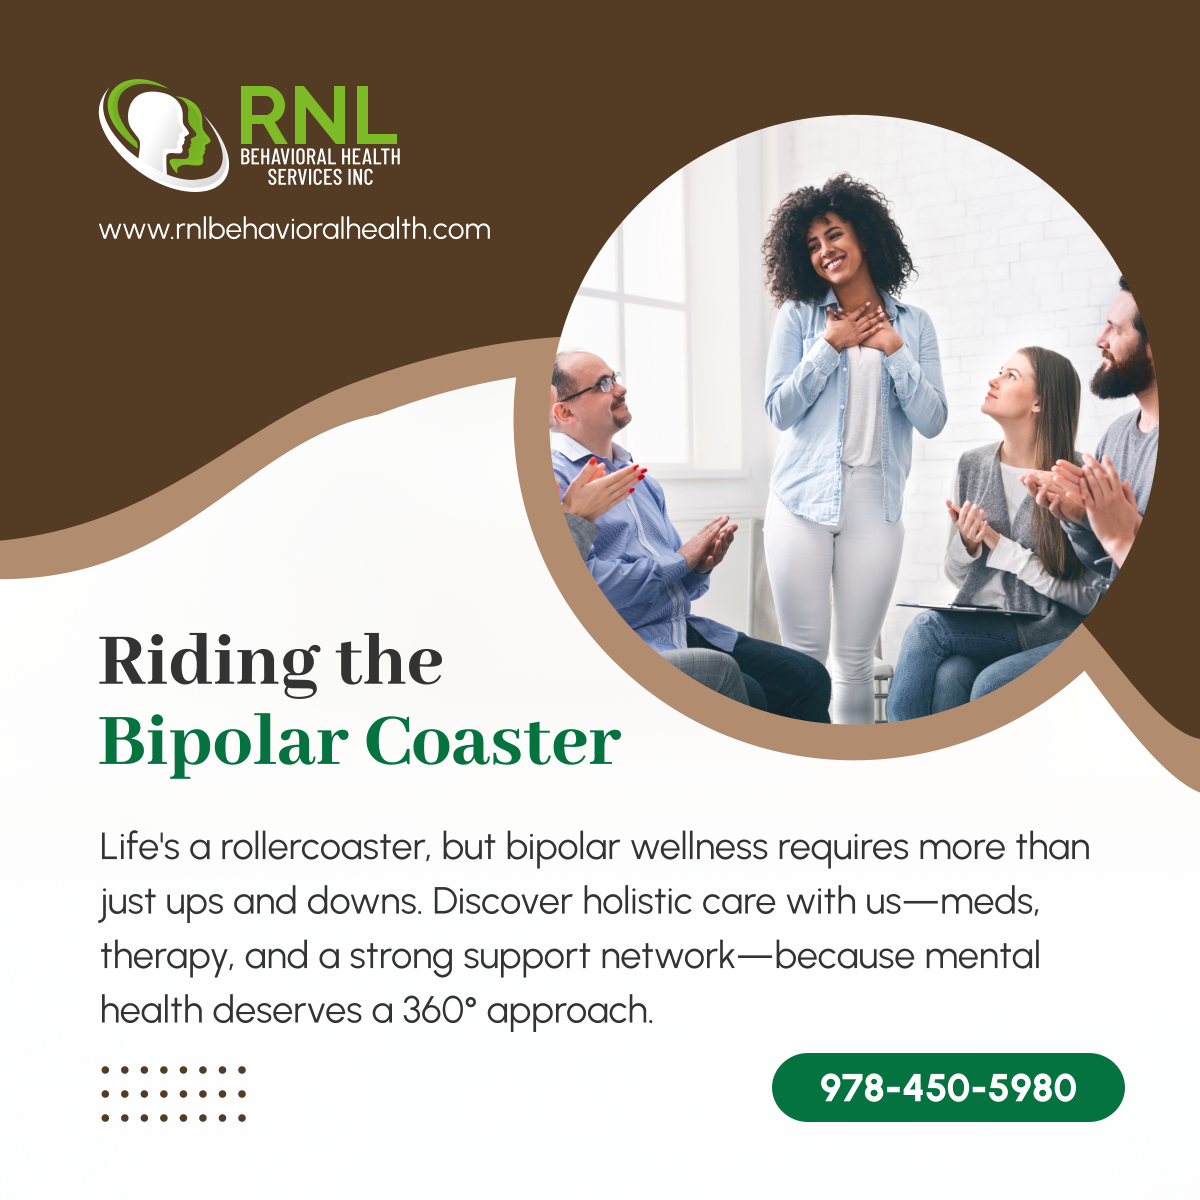 Join us on the journey to holistic bipolar health. Explore support, insight, and community at RNL Behavioral Health Services INC—your well-being matters. Read more here: tinyurl.com/562pwcn4. 

#NorthboroughMA #BehavioralHealthCare #HolisticBipolarHealth #BipolarWellness